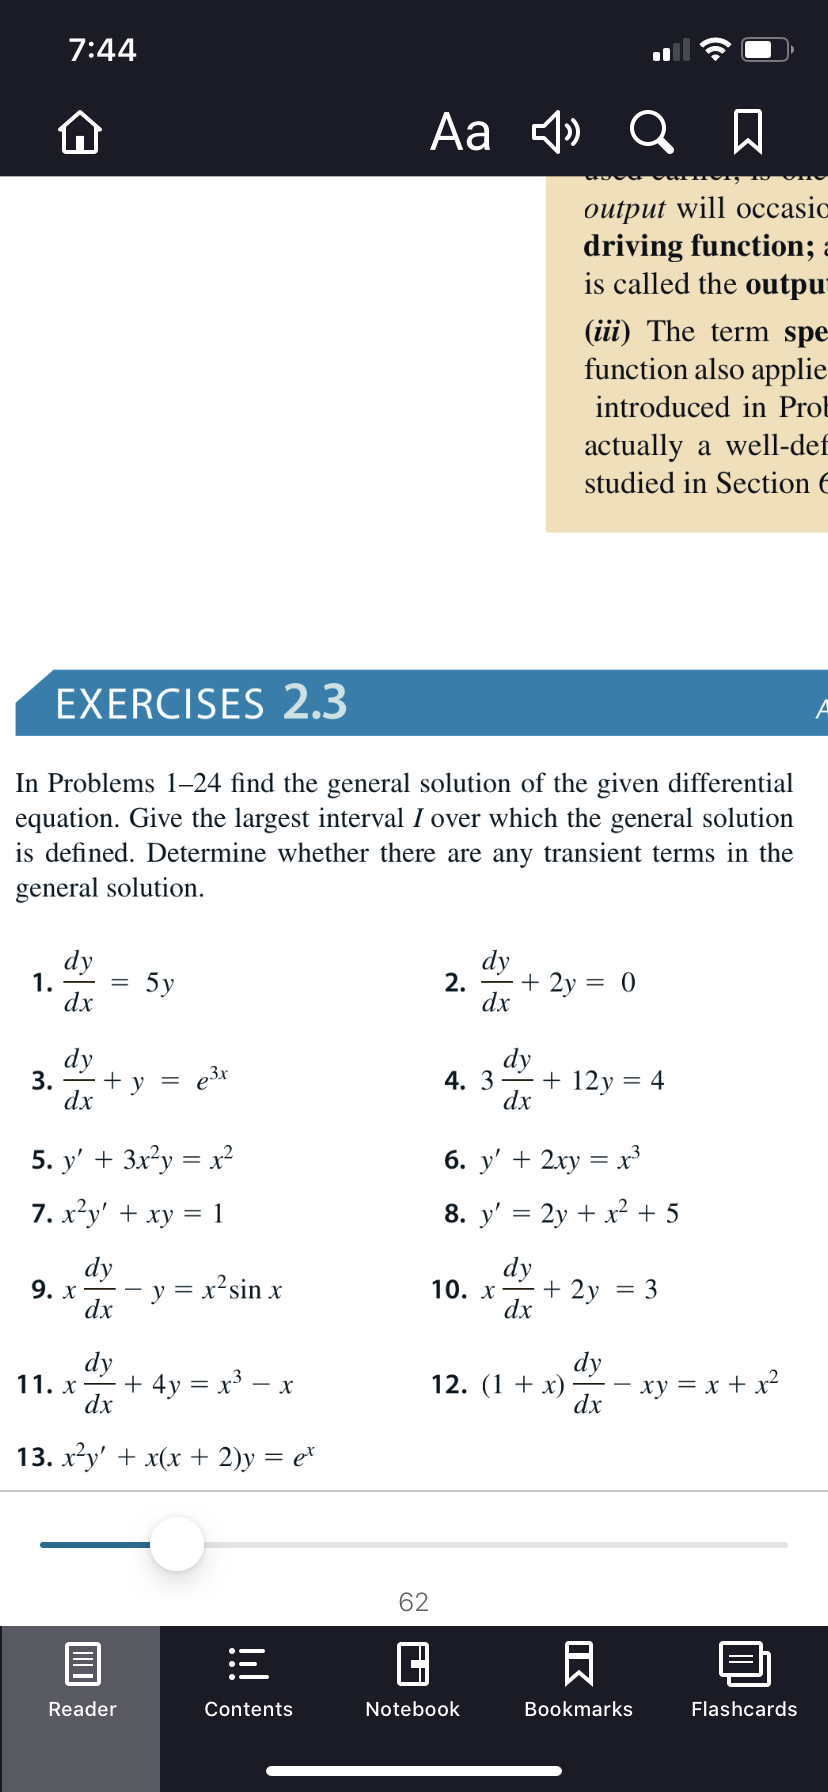 7:44
Aa 4» Q A
output will occasic
driving function; :
is called the outpur
(iii) The term spe
function also applie
introduced in Prol
actually a well-def
studied in Section 6
EXERCISES 2.3
In Problems 1-24 find the general solution of the given differential
equation. Give the largest interval I over which the general solution
is defined. Determine whether there are any transient terms in the
general solution.
dy
1.
dx
dy
2. -+ 2y = 0
dx
5y
dy
dy
e3x
4. 3
+ 12y = 4
3.
y
dx
dx
5. y' + 3x?у %3 х?
6. у' + 2ху %3D х3
8. y' = 2y + x² + 5
7. х-у' + ху %3D 1
dy
9. х
dx
dy
10. х — + 2у
dx
= x²sin x
3
%3D
dy
11. x - + 4y = x³ – x
dx
dy
ху %3D х + x?
dx
12. (1 + x)
13. xу + x(х + 2)у 3D е*
62
Reader
Notebook
Bookmarks
Flashcards
Contents
IK
!
